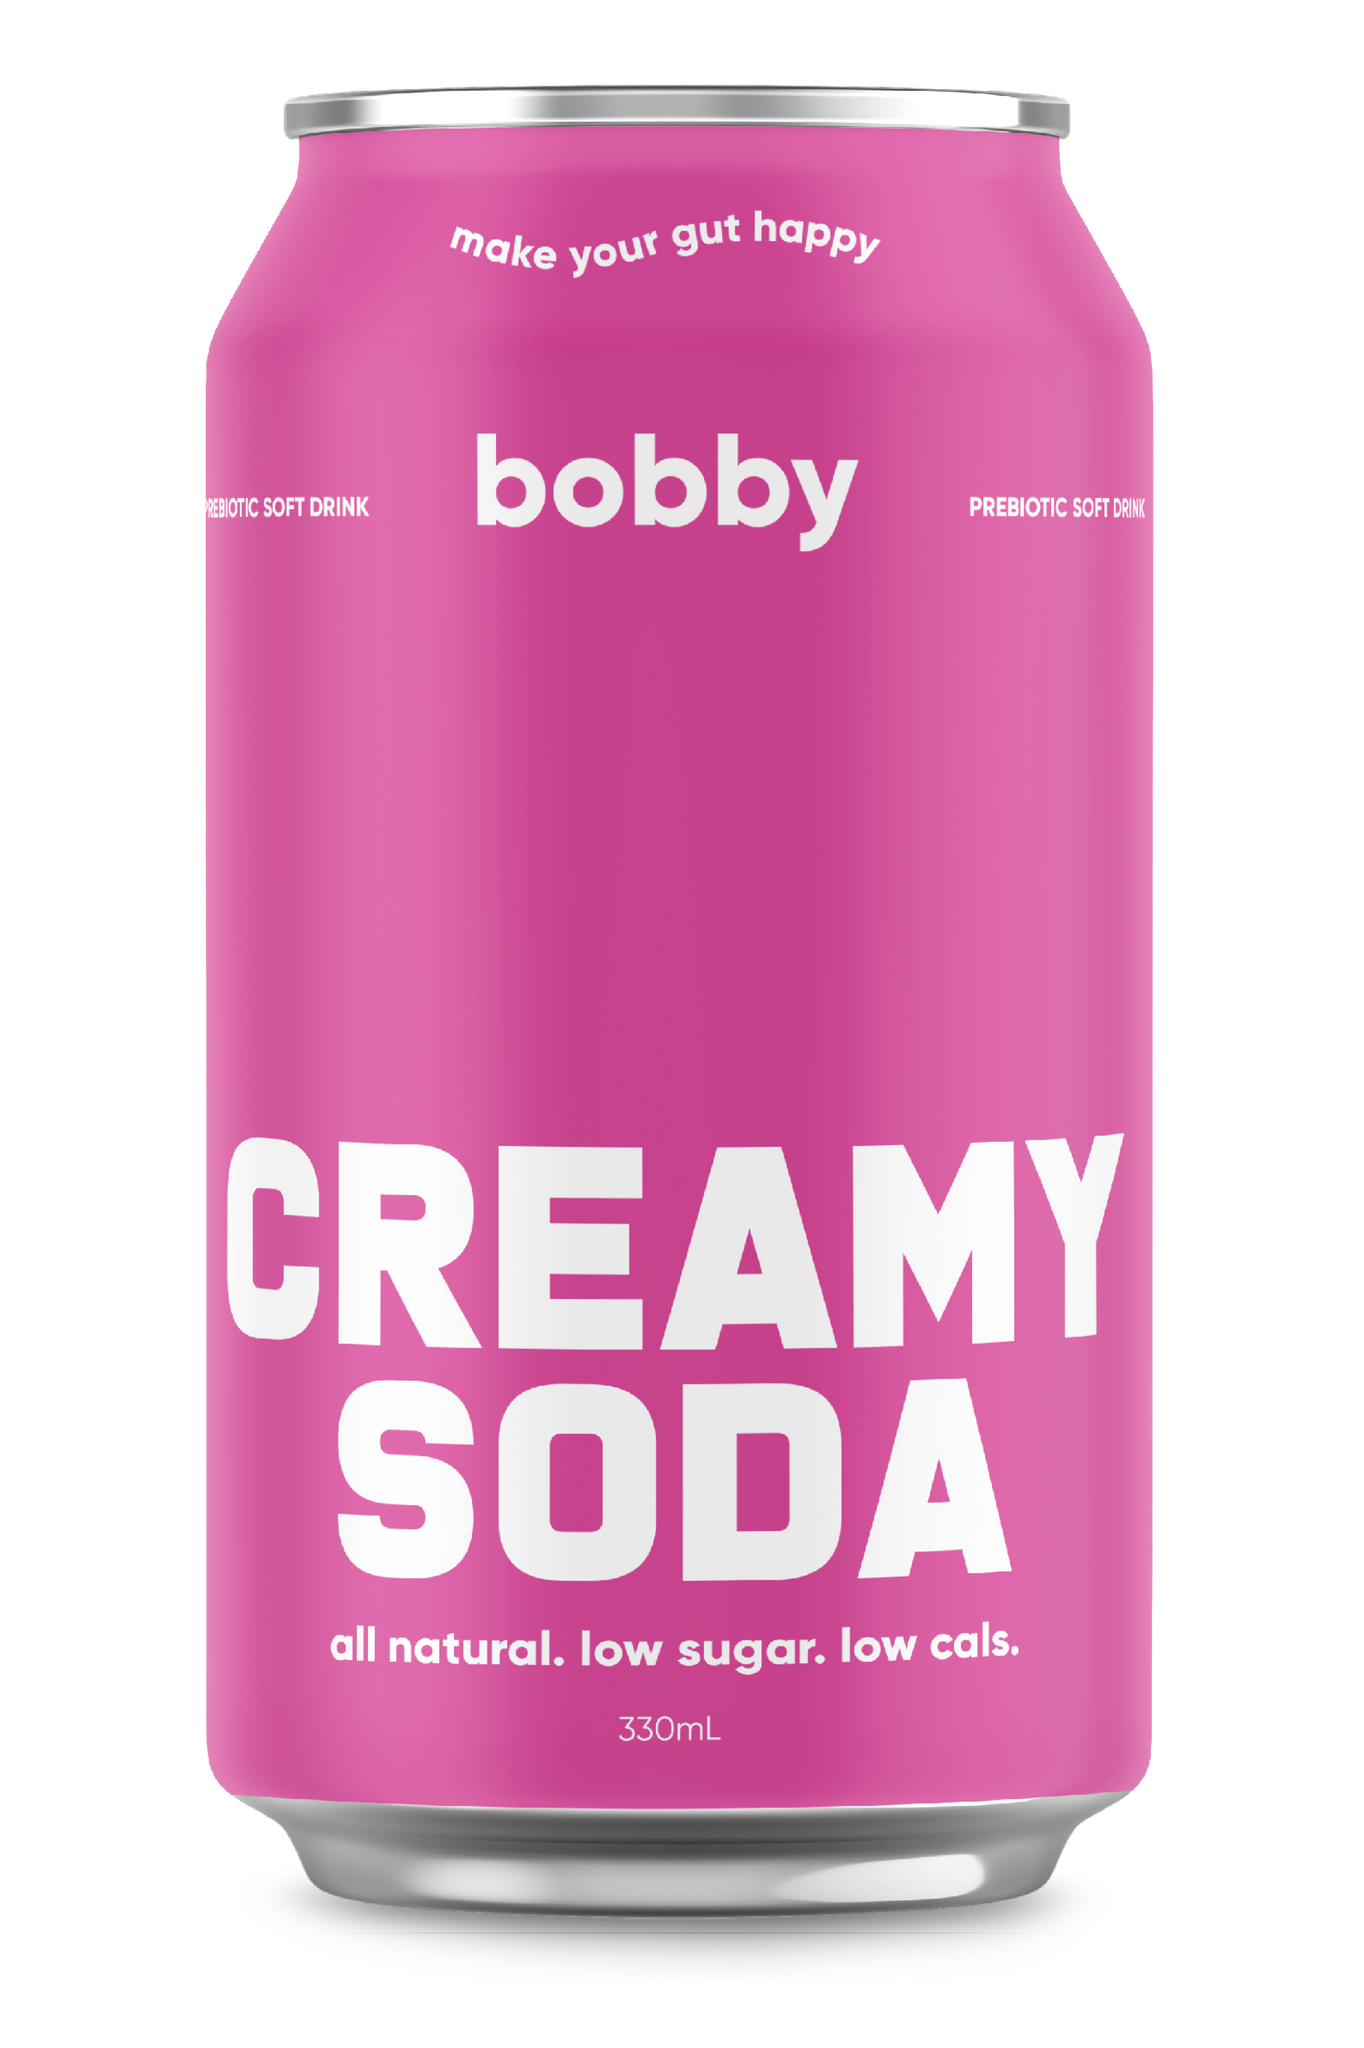 Creamy soda soft drink coles drink. All natural, Low sugar and Low calories with added prebiotics